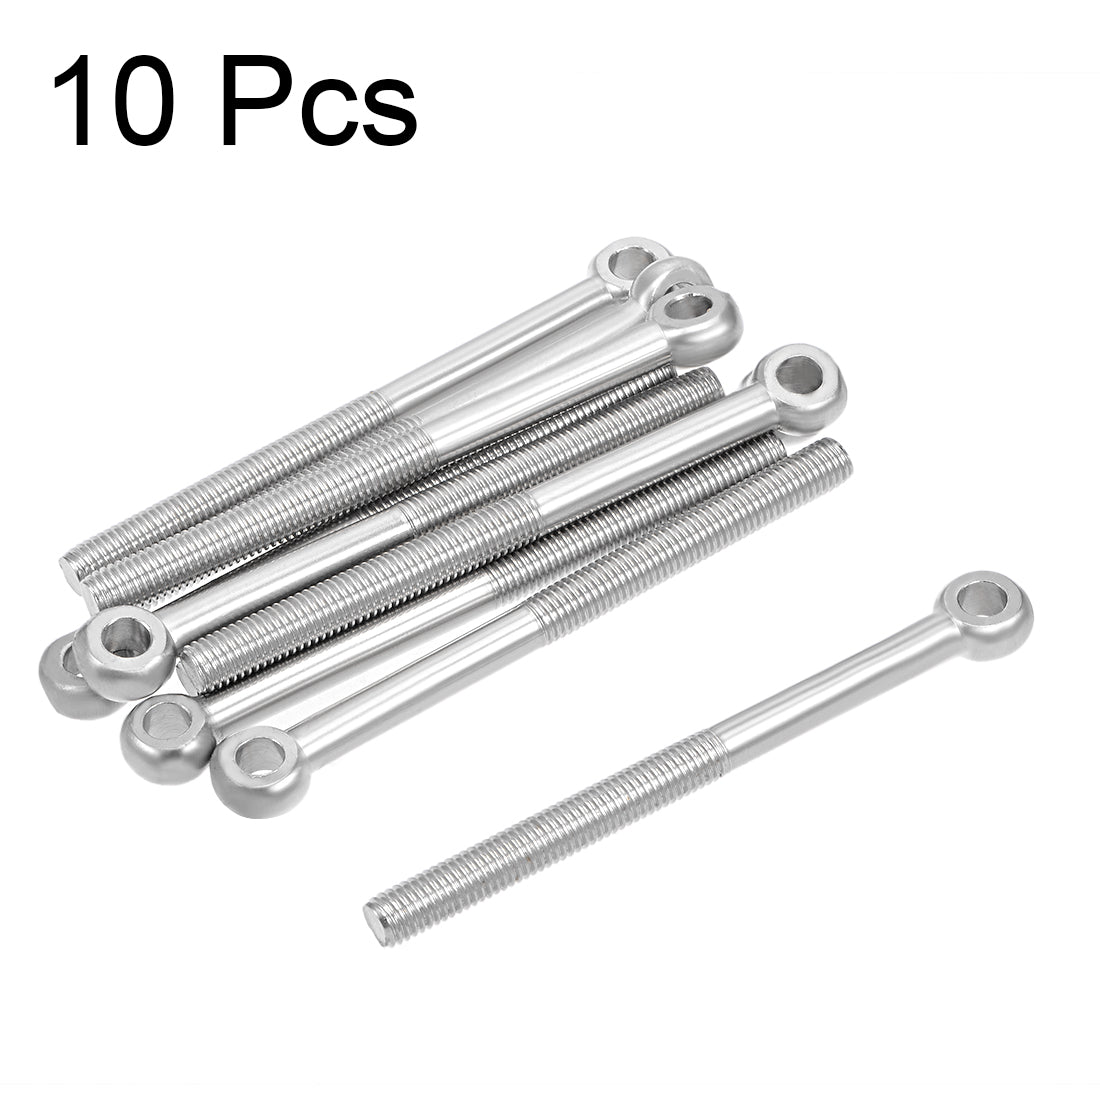 Uxcell Uxcell M10 x 130mm 304 Stainless Steel Machine Shoulder Lift Eye Bolt Rigging 10pcs